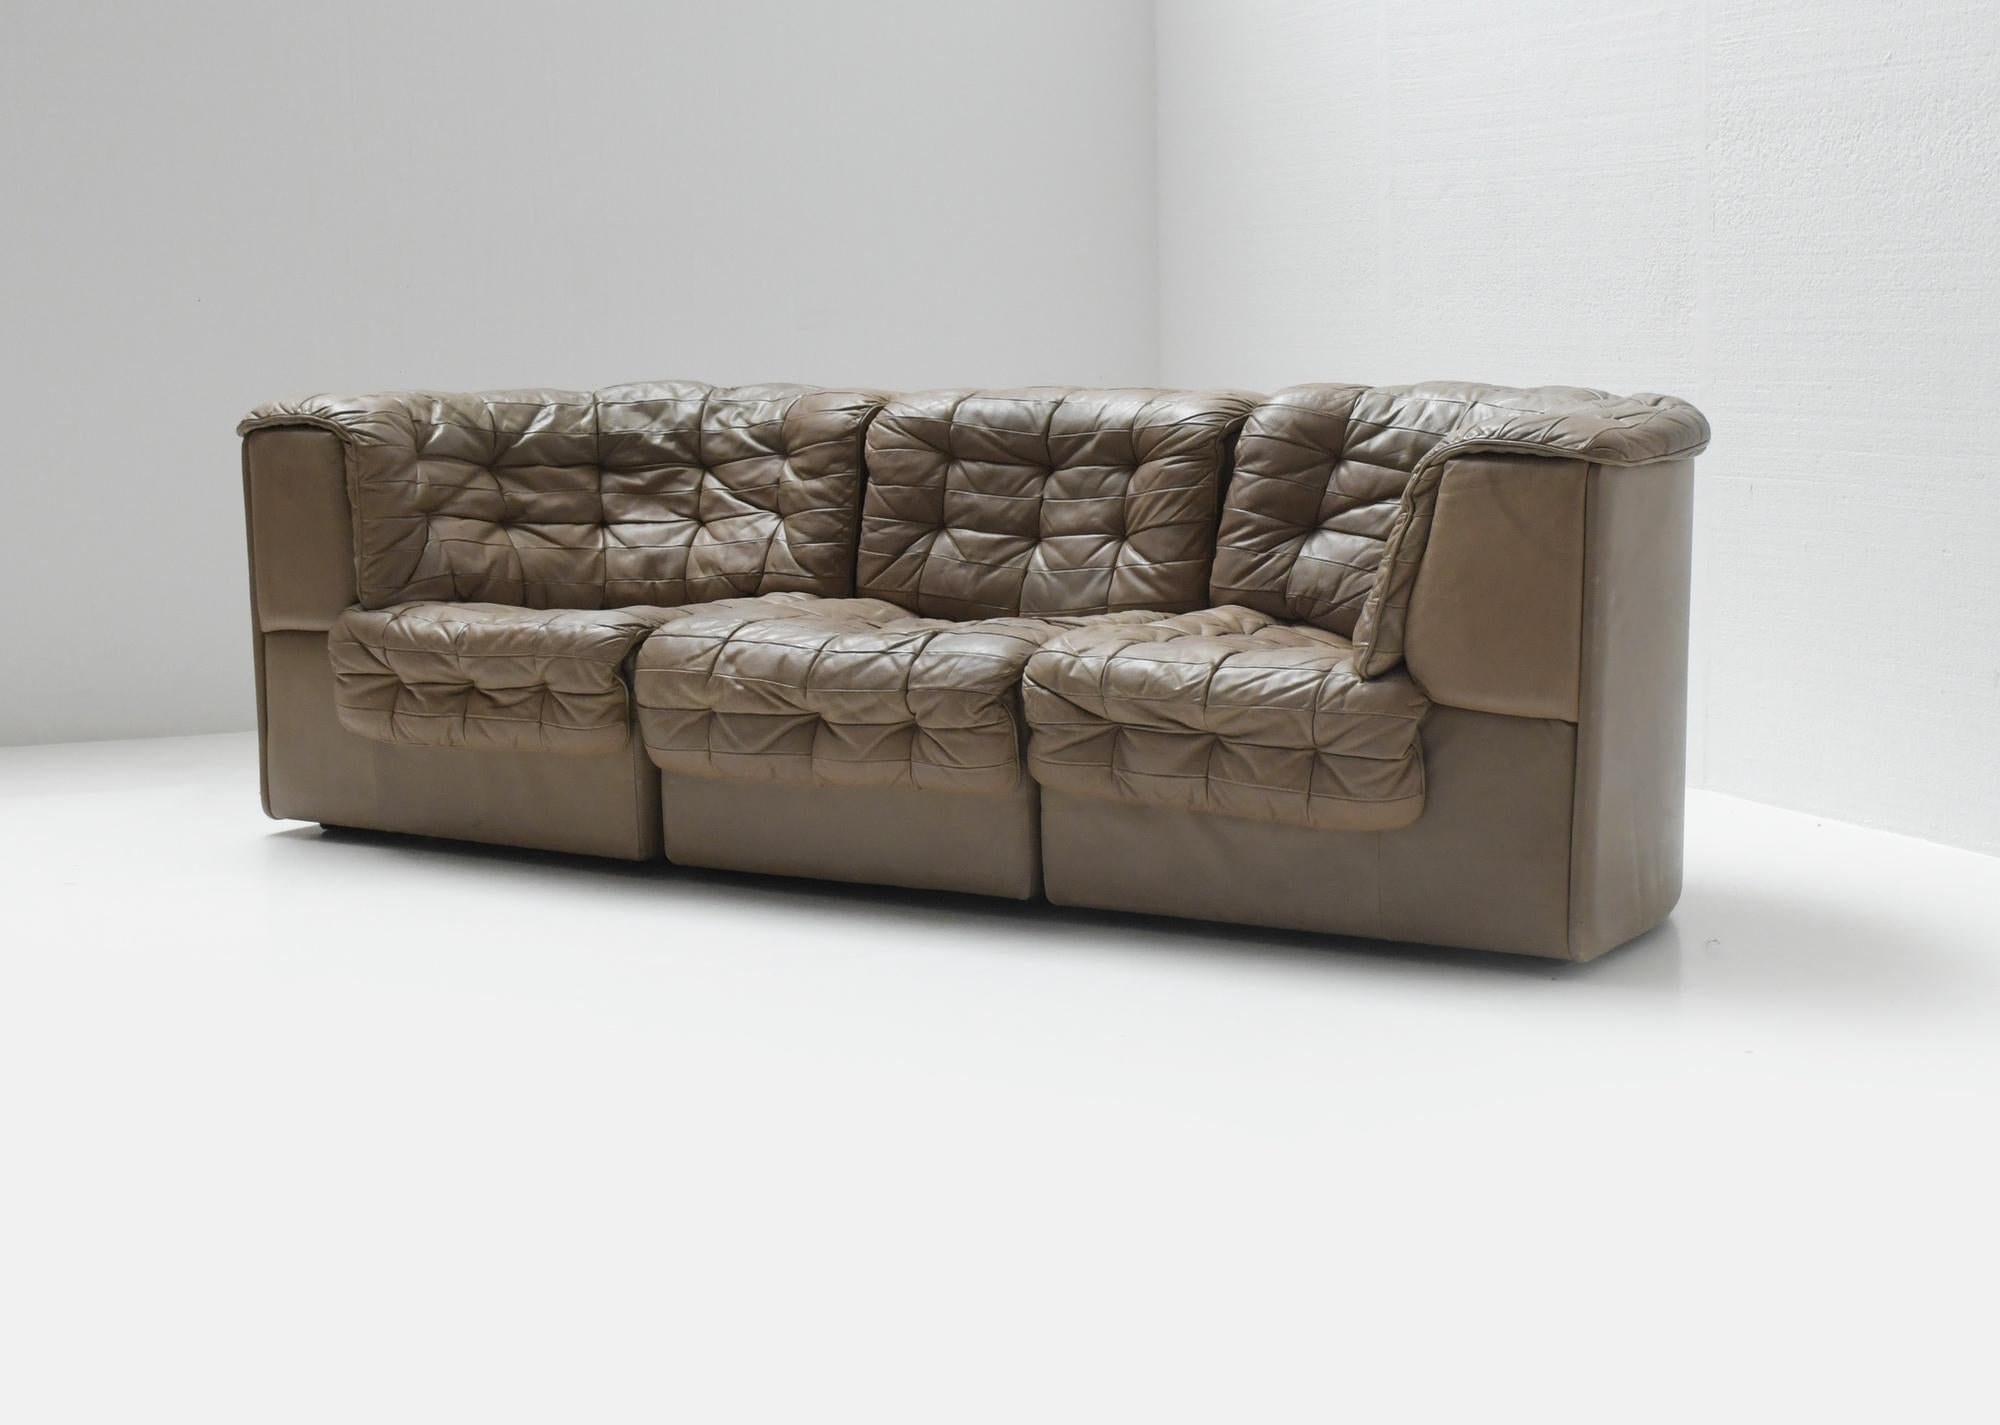 20th Century Ds 11 Modular Sofa in Brown Patchwork Leather by De Sede Team for De Sede Swiss For Sale